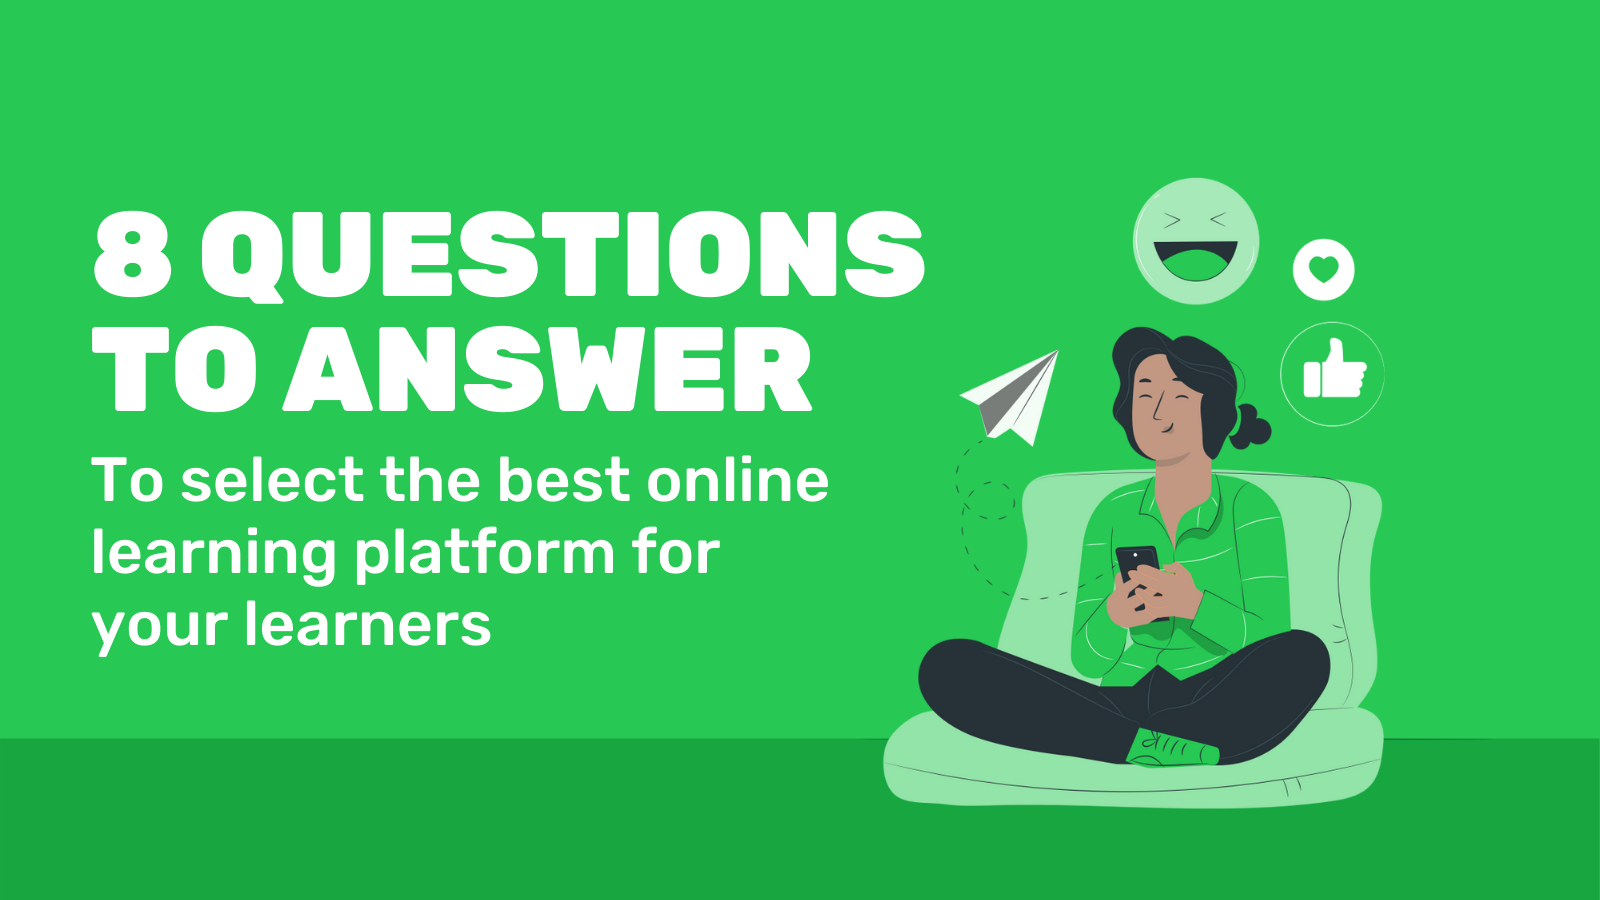 8 questions to select the best online training platform for your learners in 2022